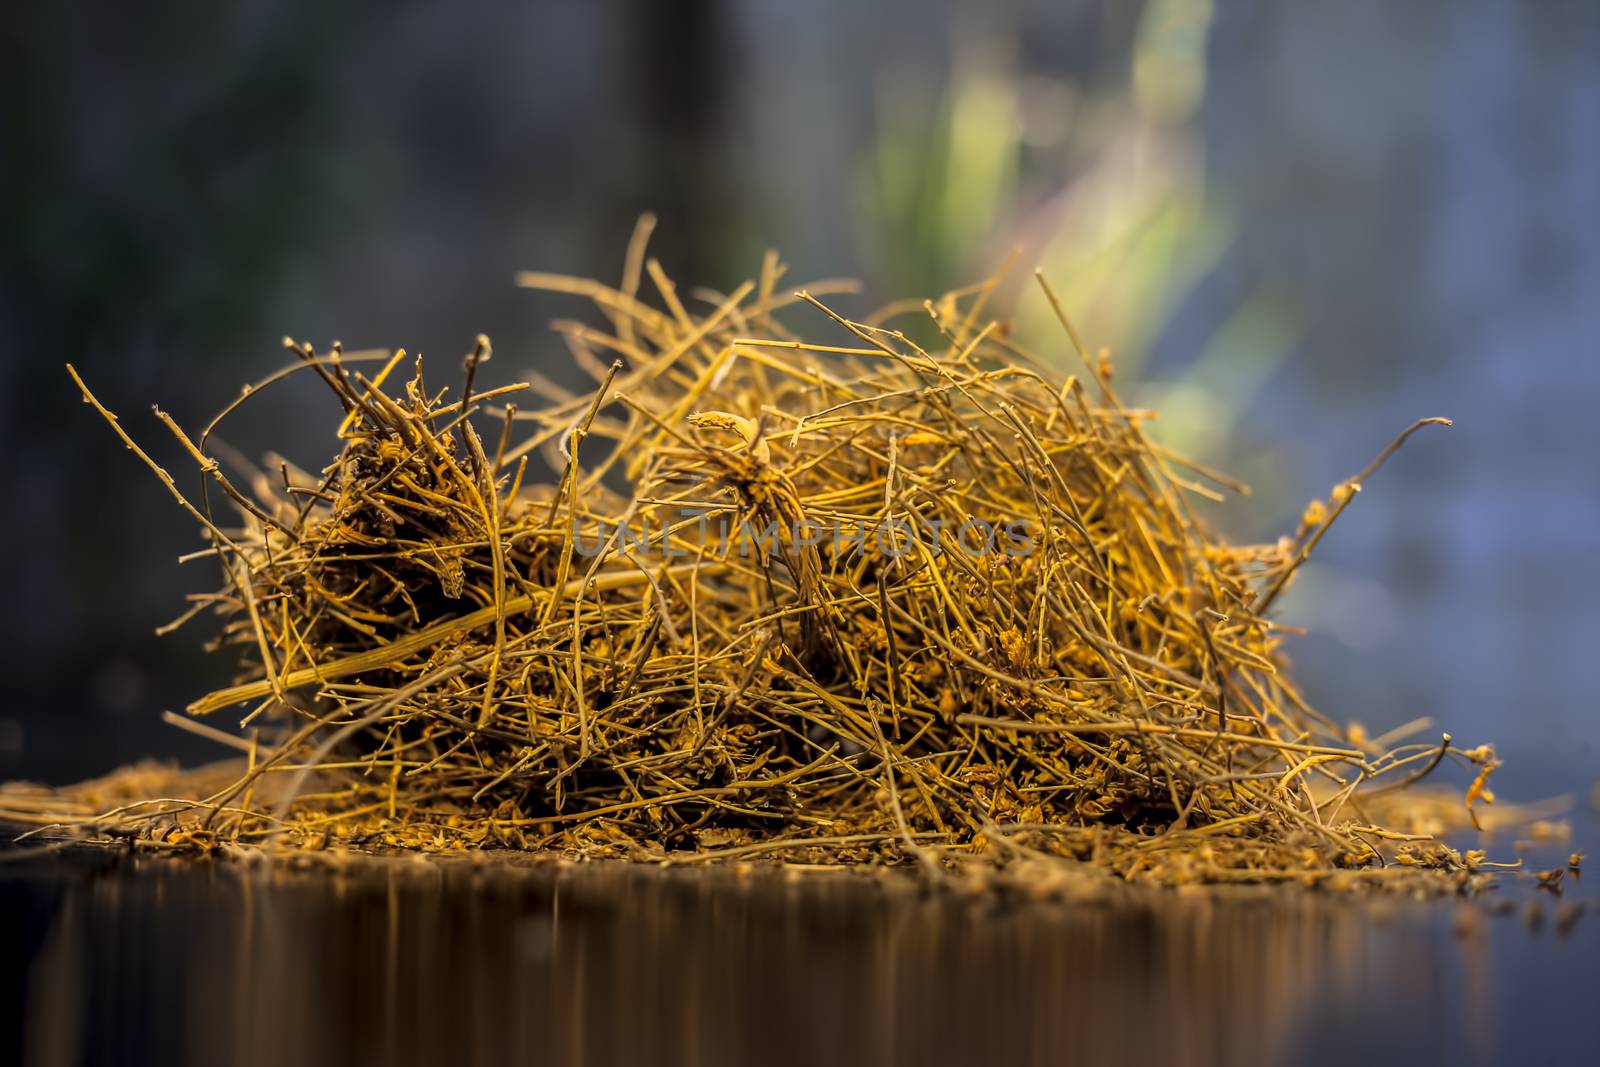 Close up shot of ayurvedic memory booster herb shankhpushpi or Convolvulus pluricaulis roots on black wooden surface with selective focus and blurred background. by mirzamlk